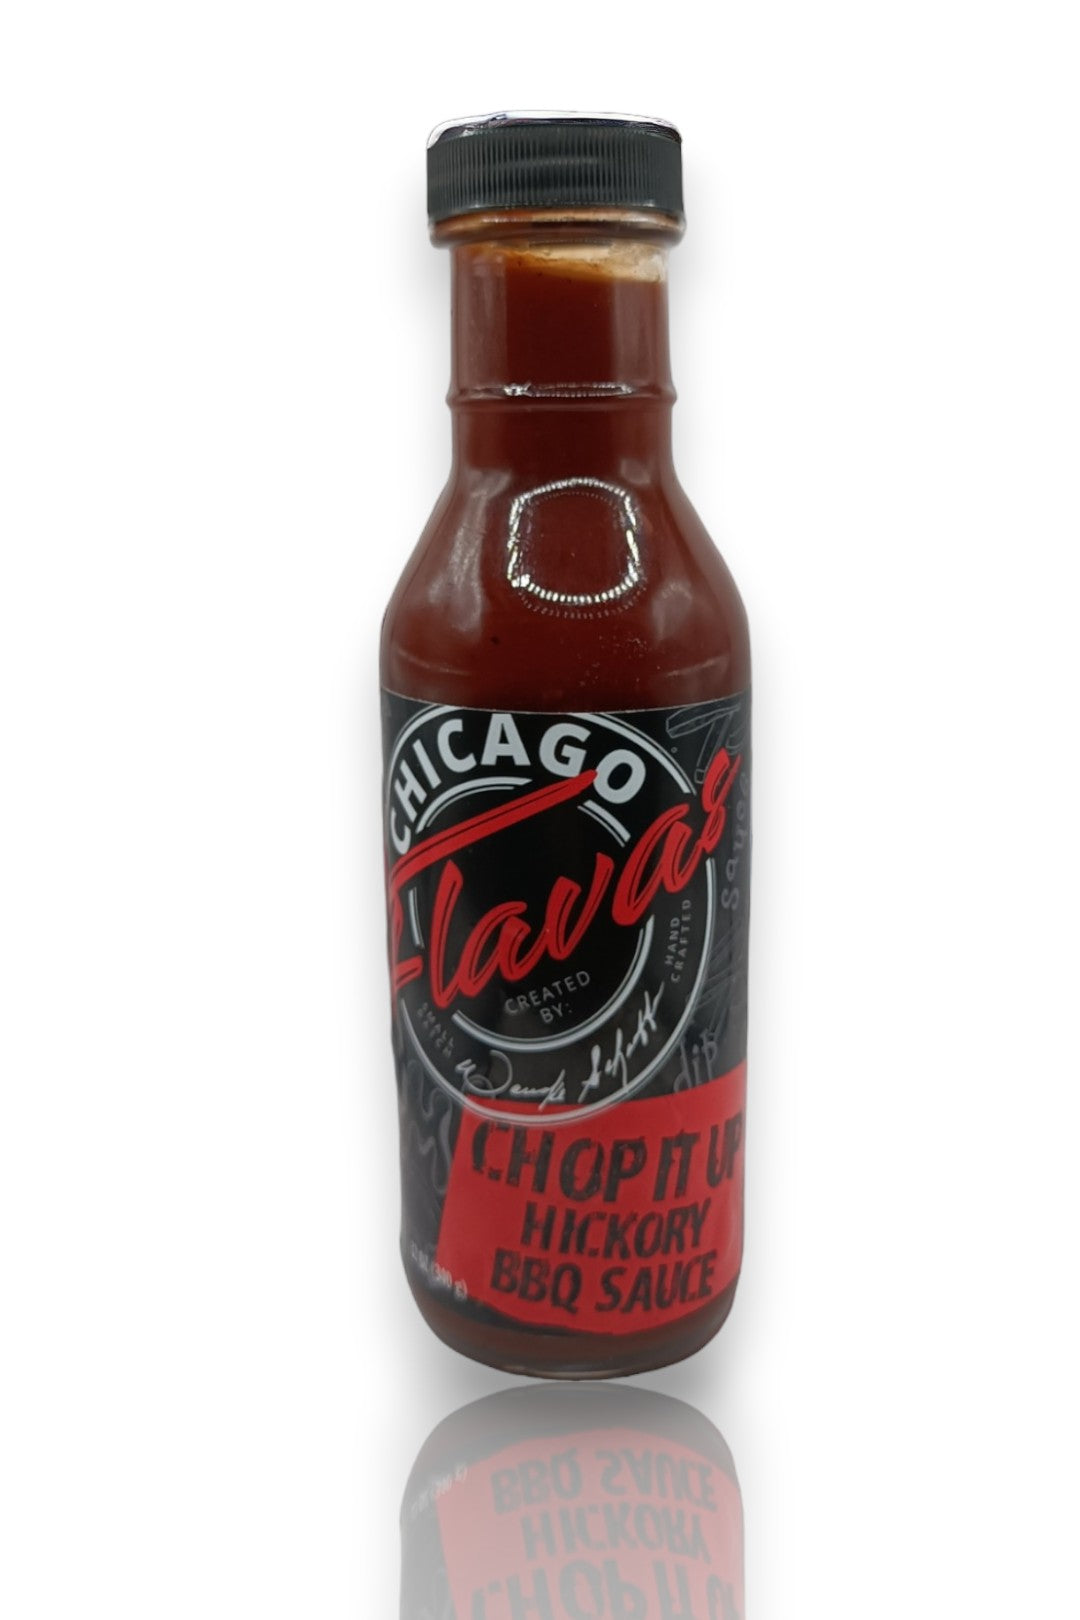 CHOP IT UP HICKORY BBQ SAUCE